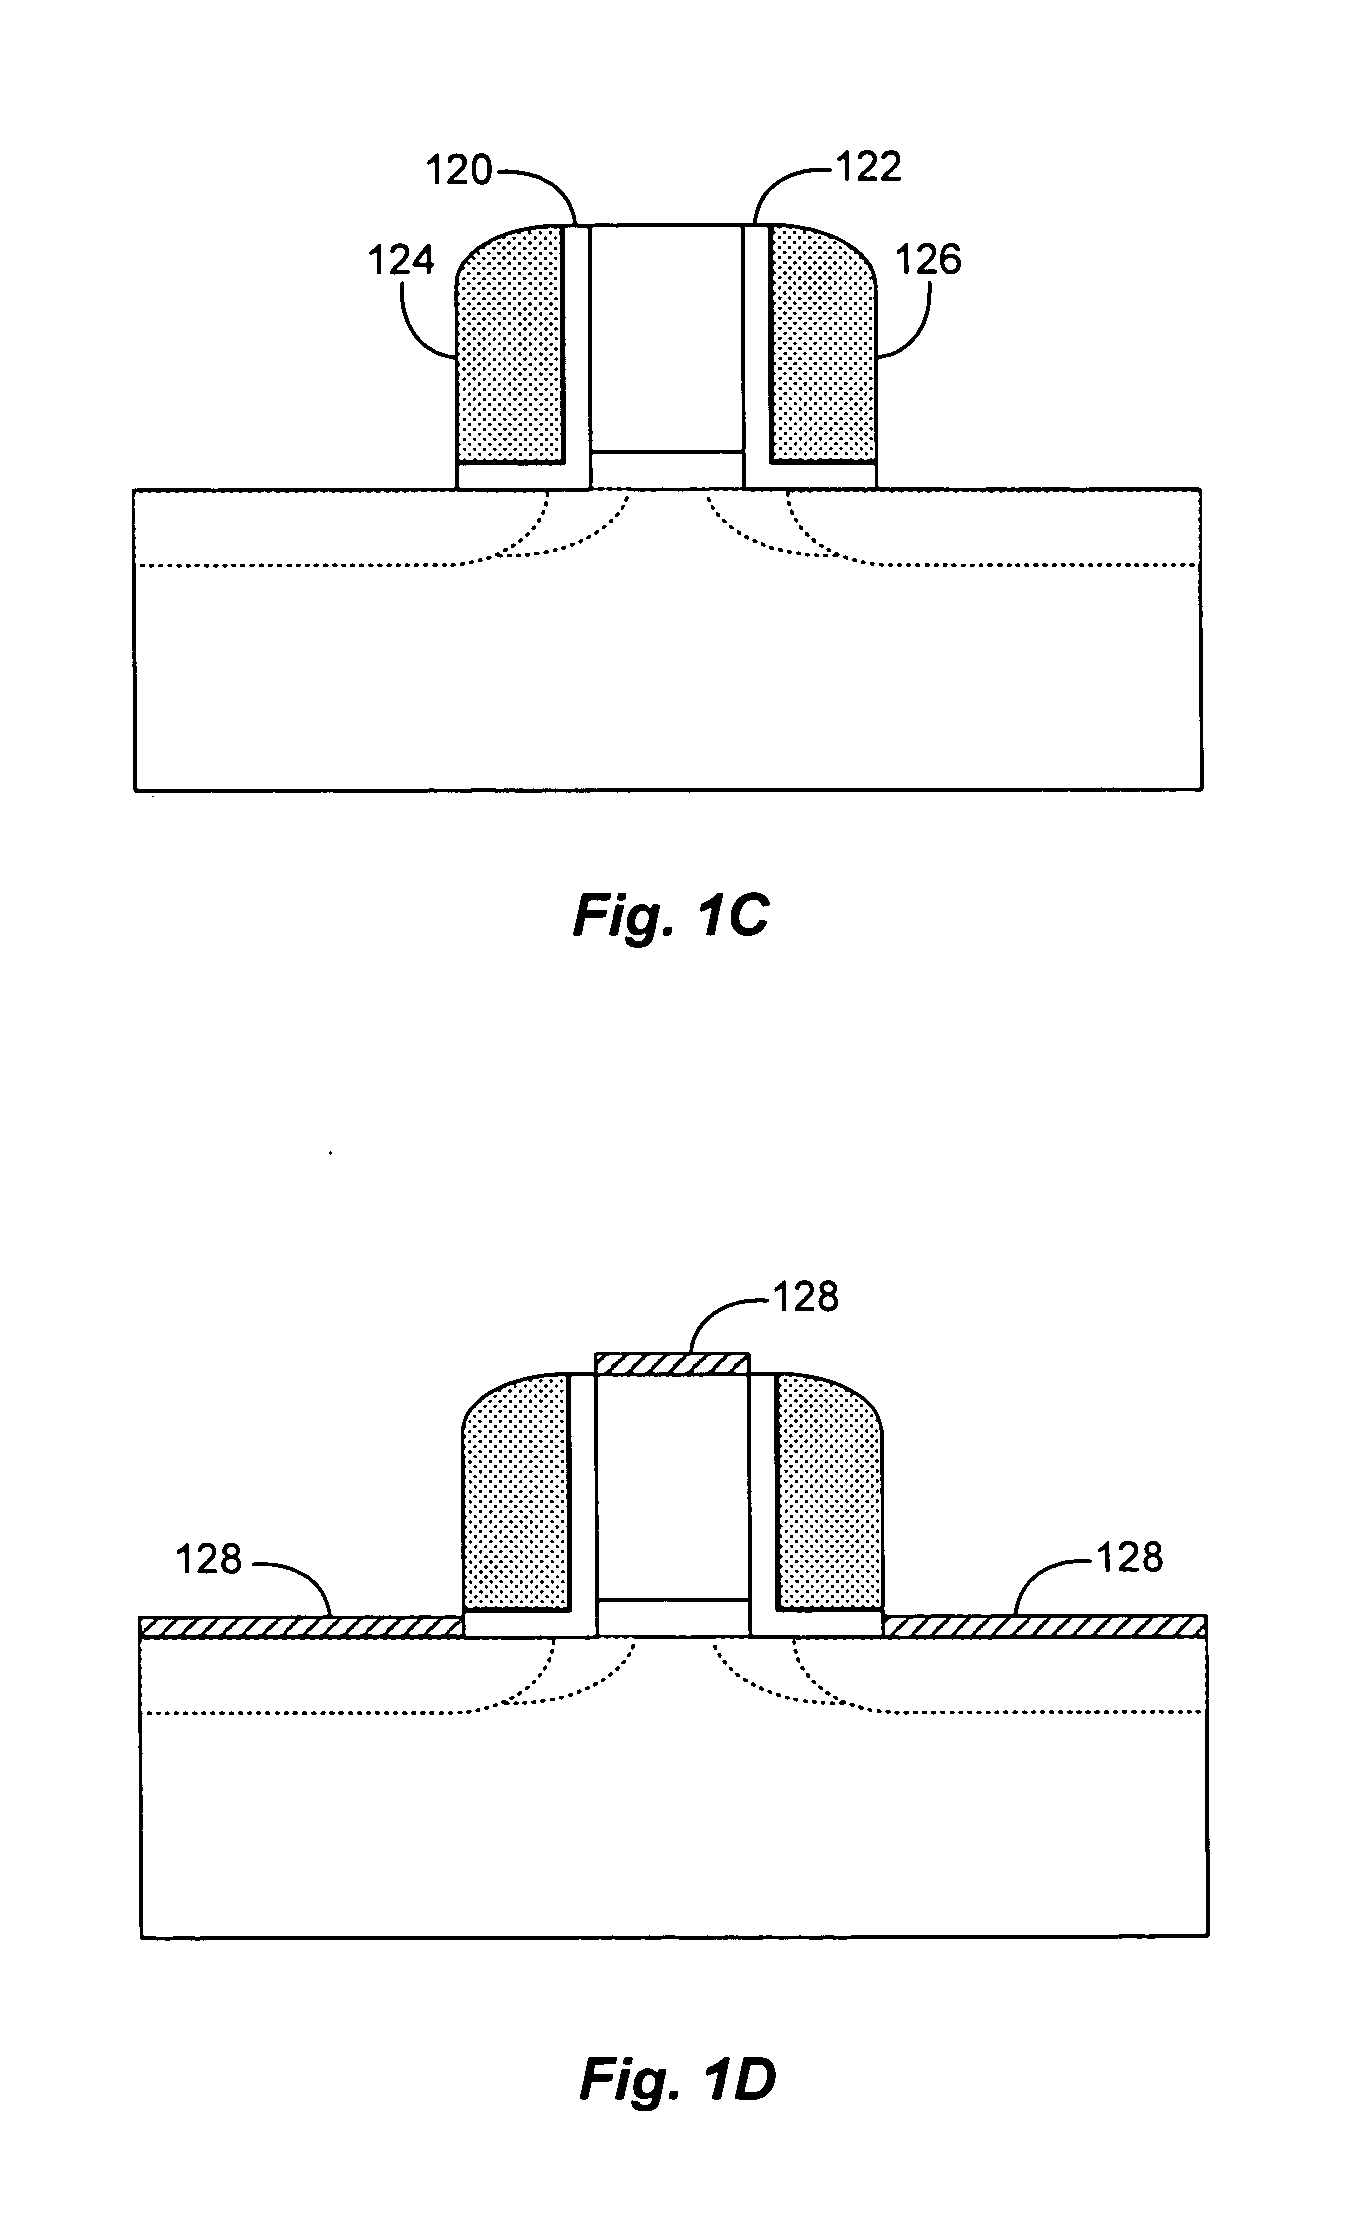 Method for forming a low thermal budget spacer